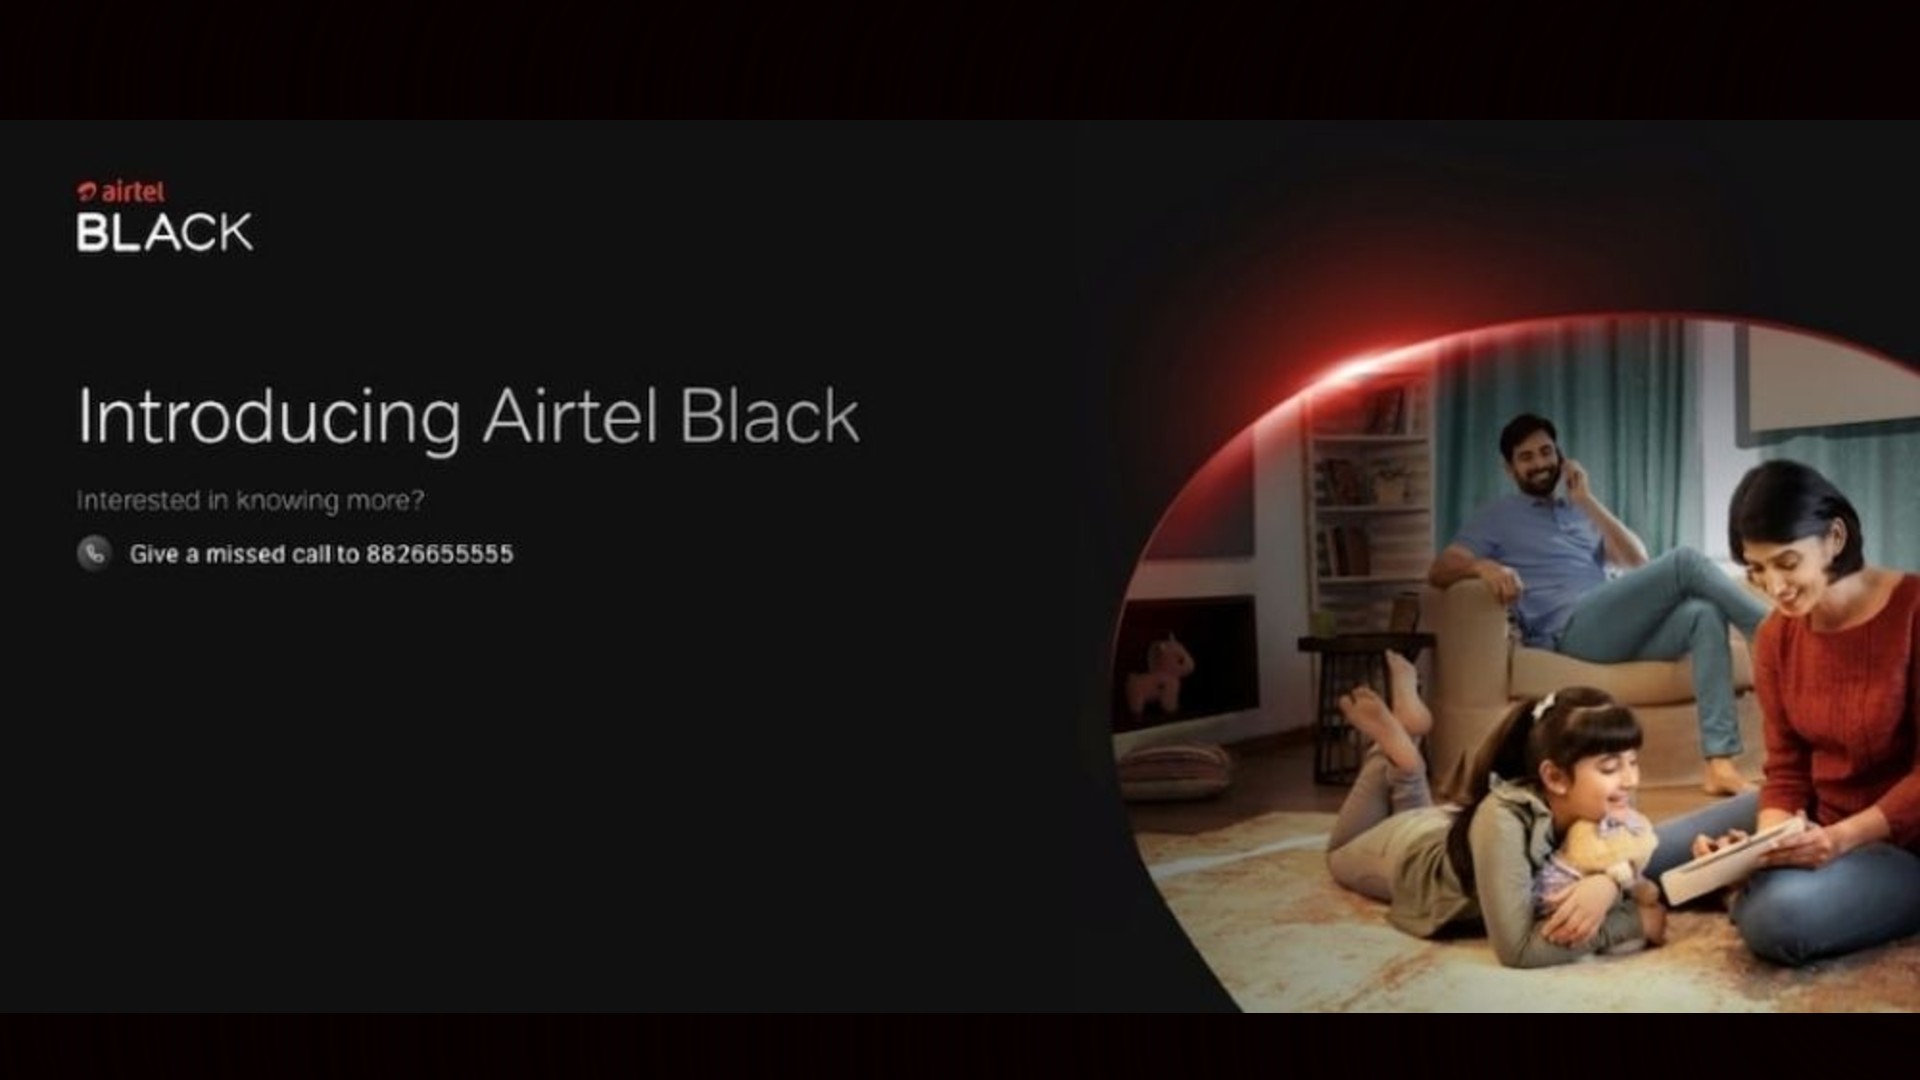 Airtel Black Lets You Manage Your Postpaid, Dth, And Fiber Accounts All In One Place!